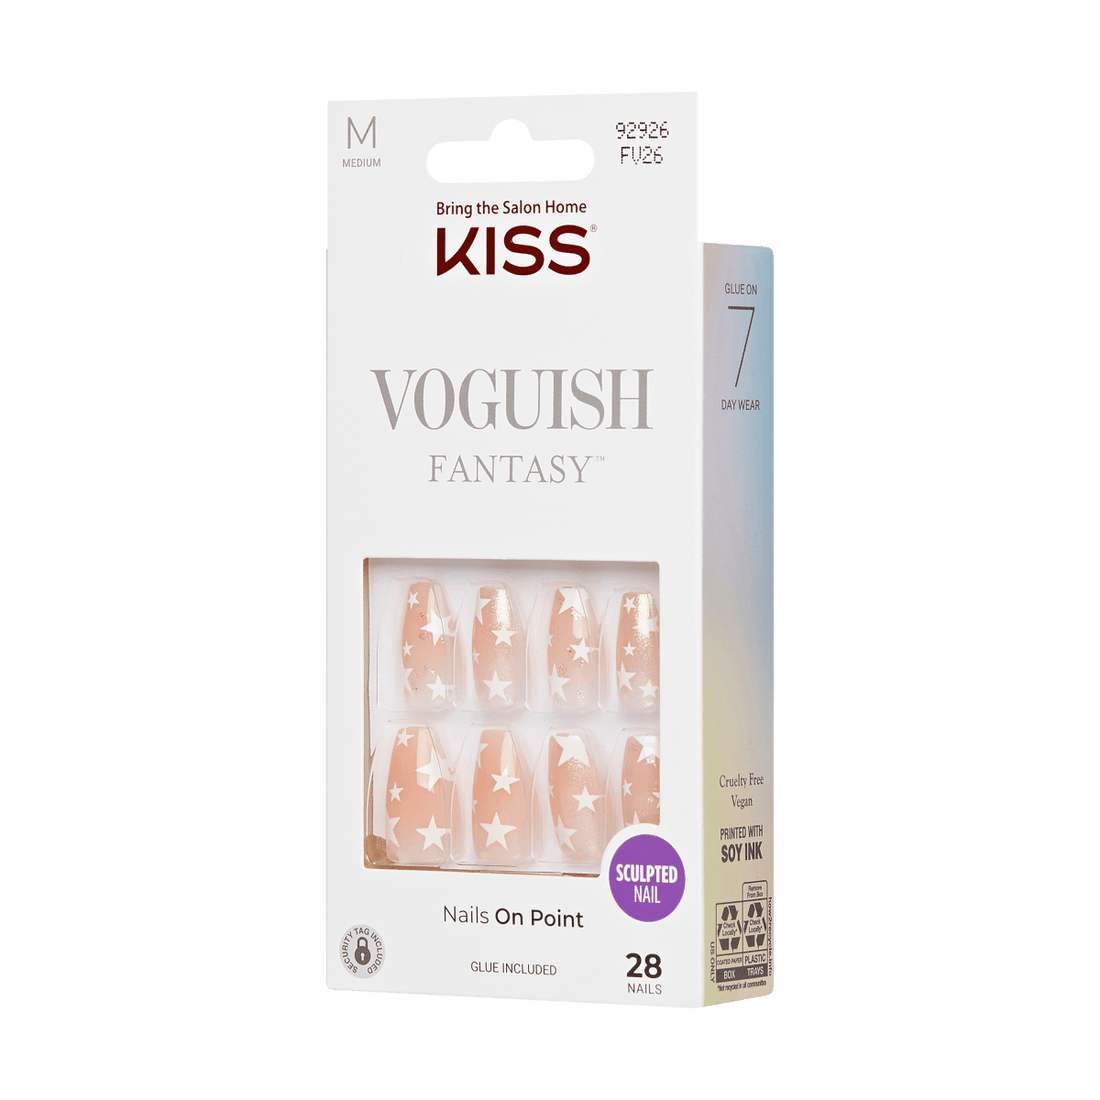 KISS Voguish Fantasy, Press-On Nails, To The Sea, Nude, Med Coffin, 28ct